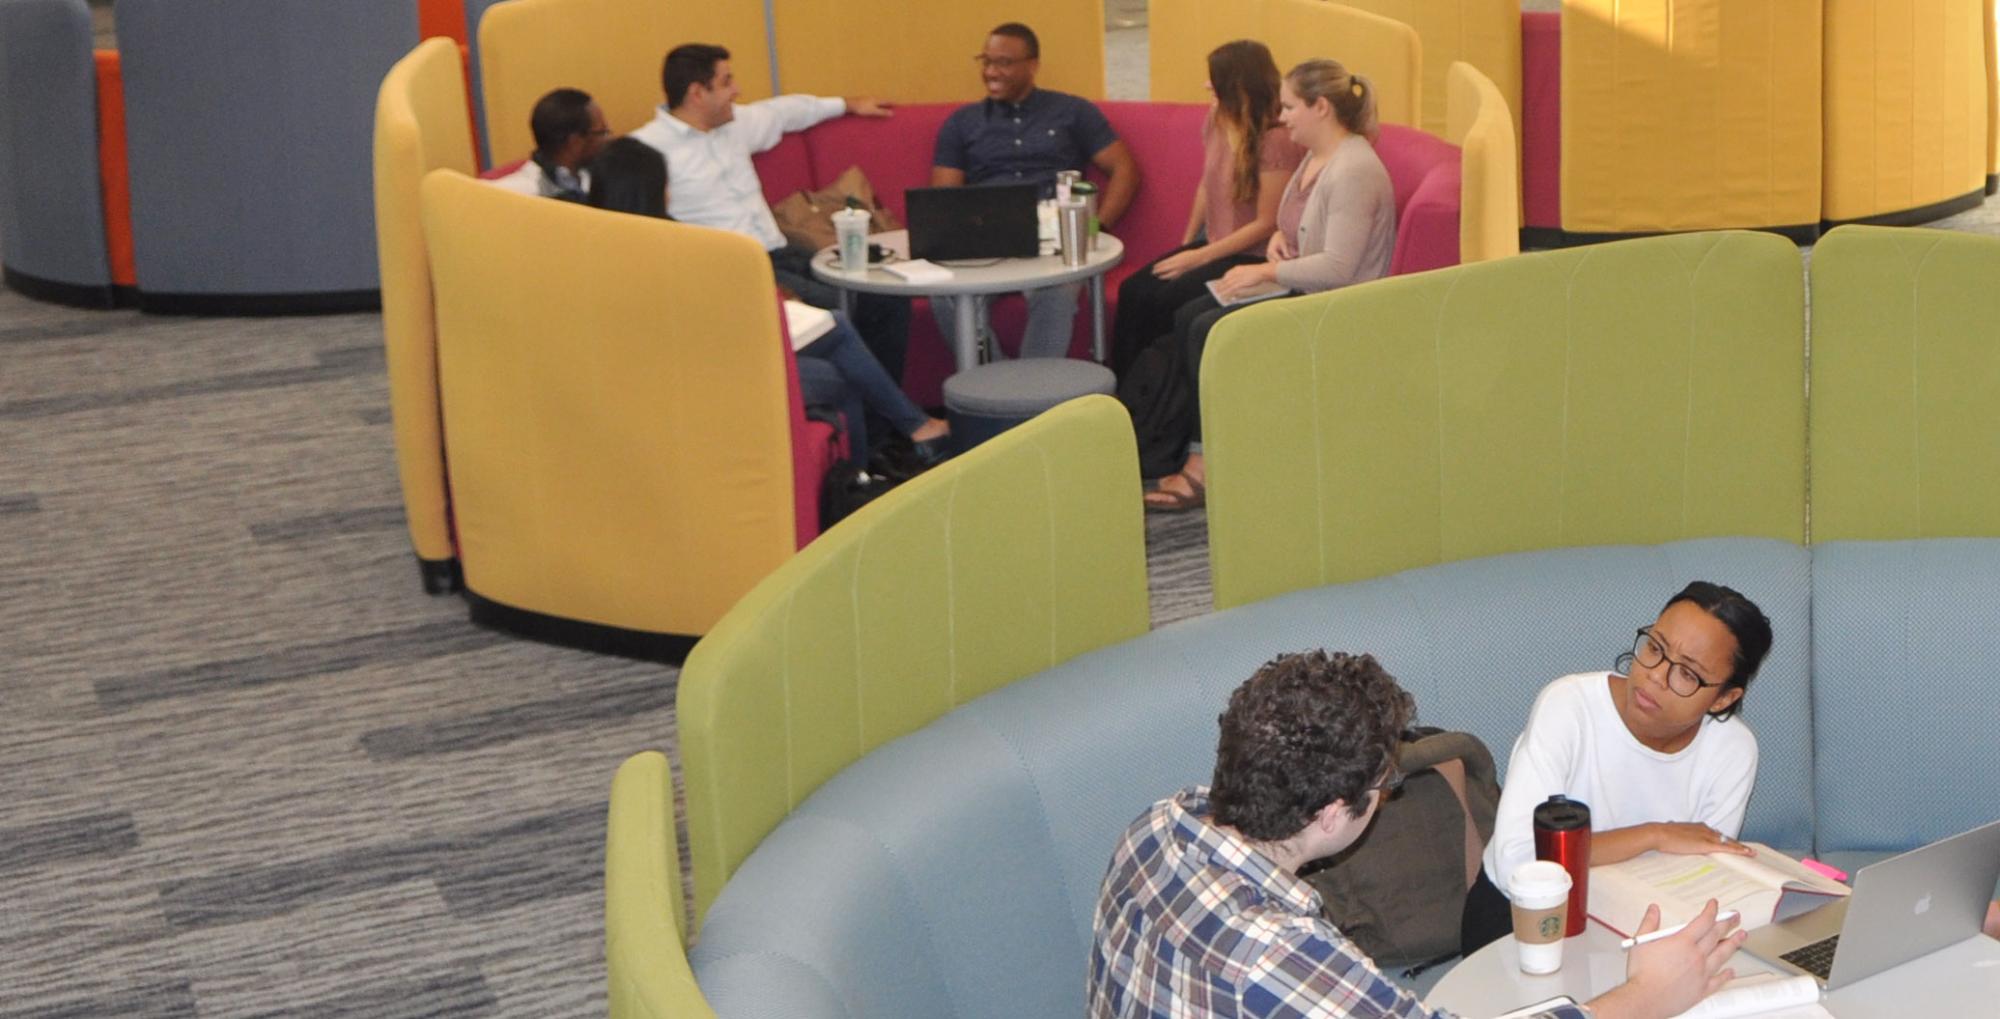 Students in learning commons in discussion